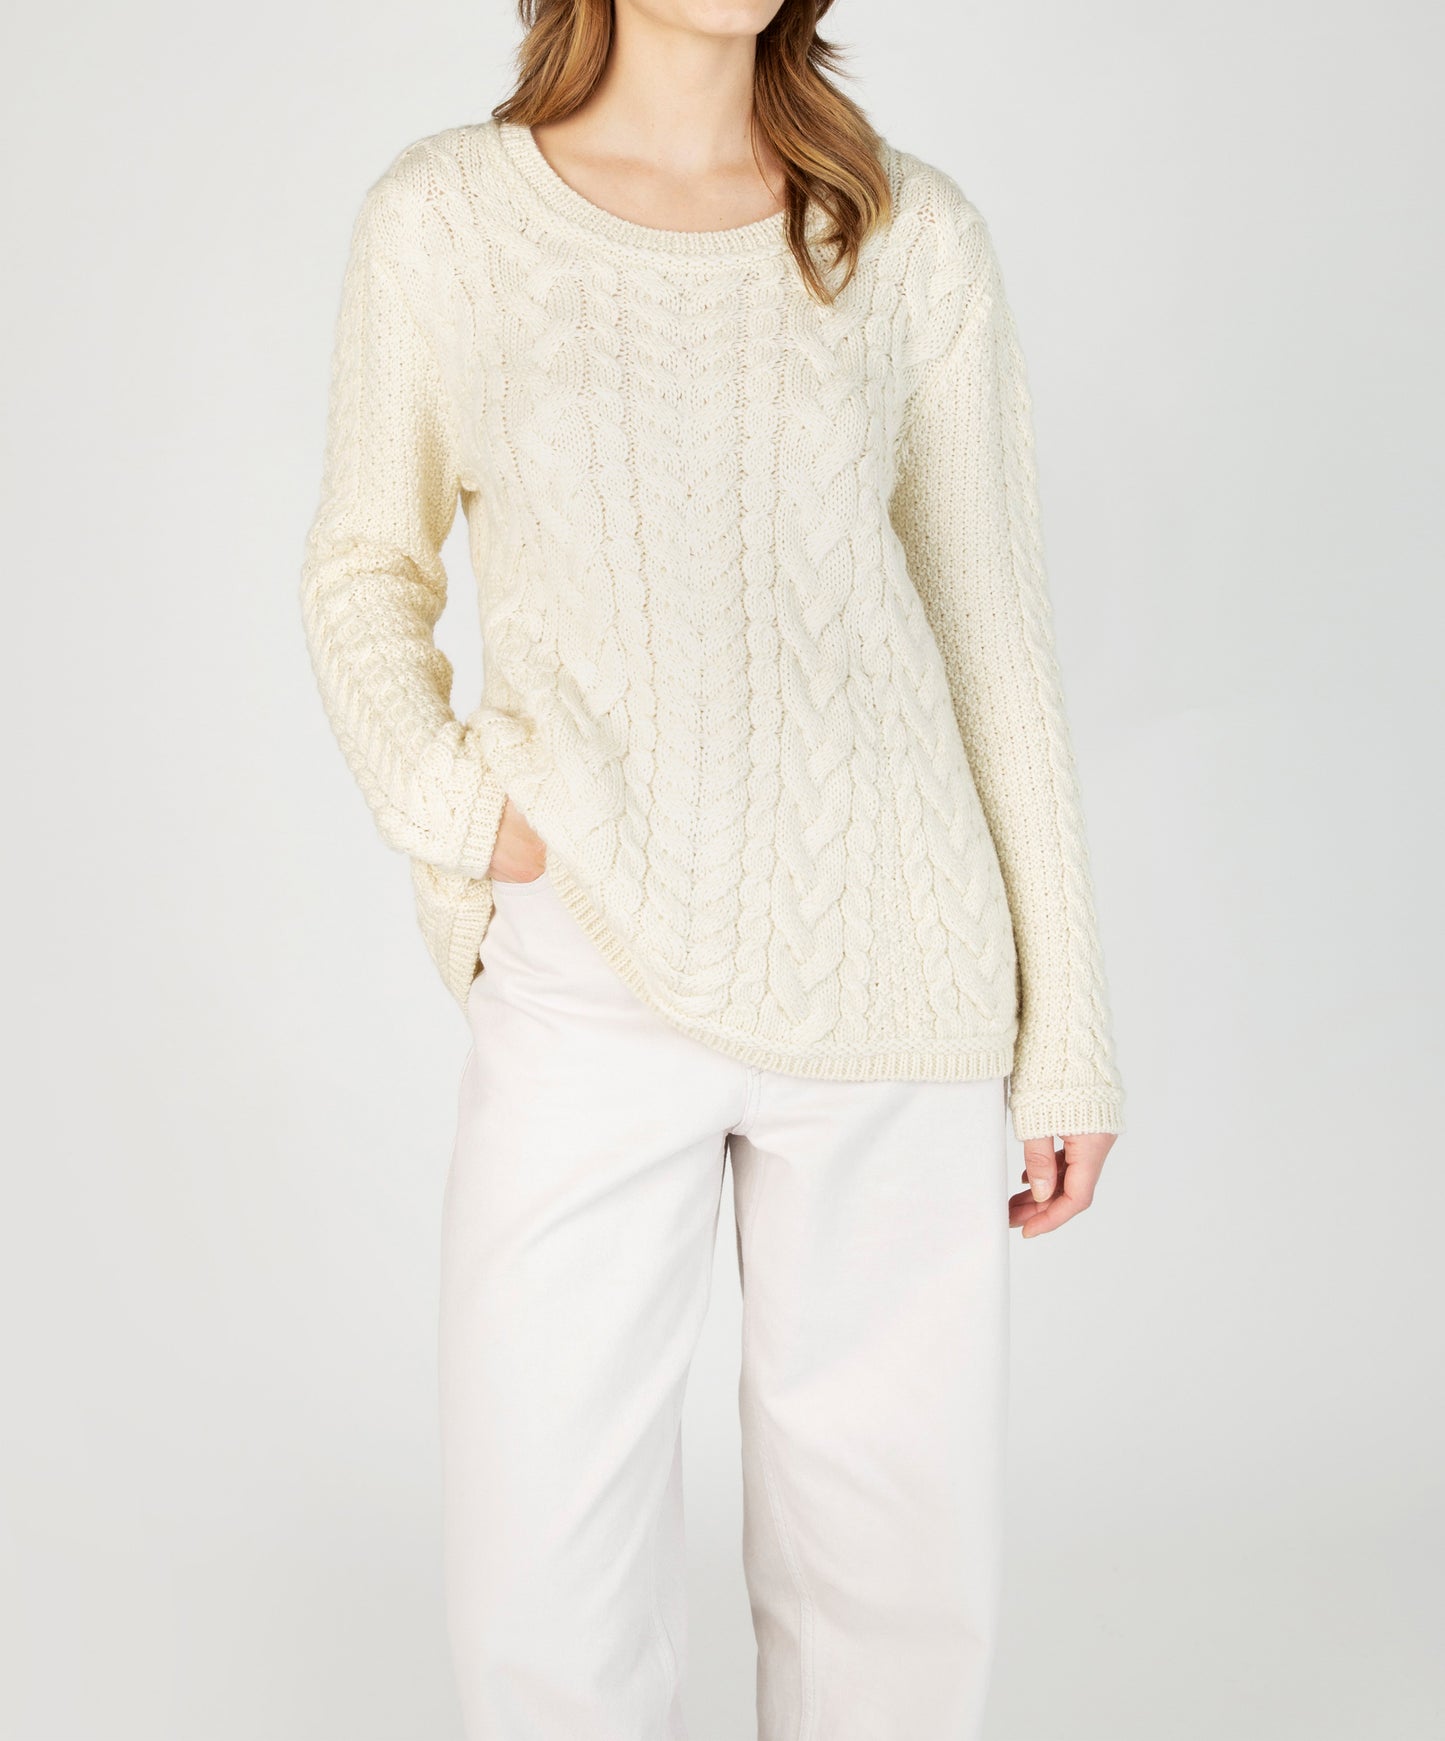 IrelandsEye Knitwear Primose A-Line Cable Round Neck Sweater Natural